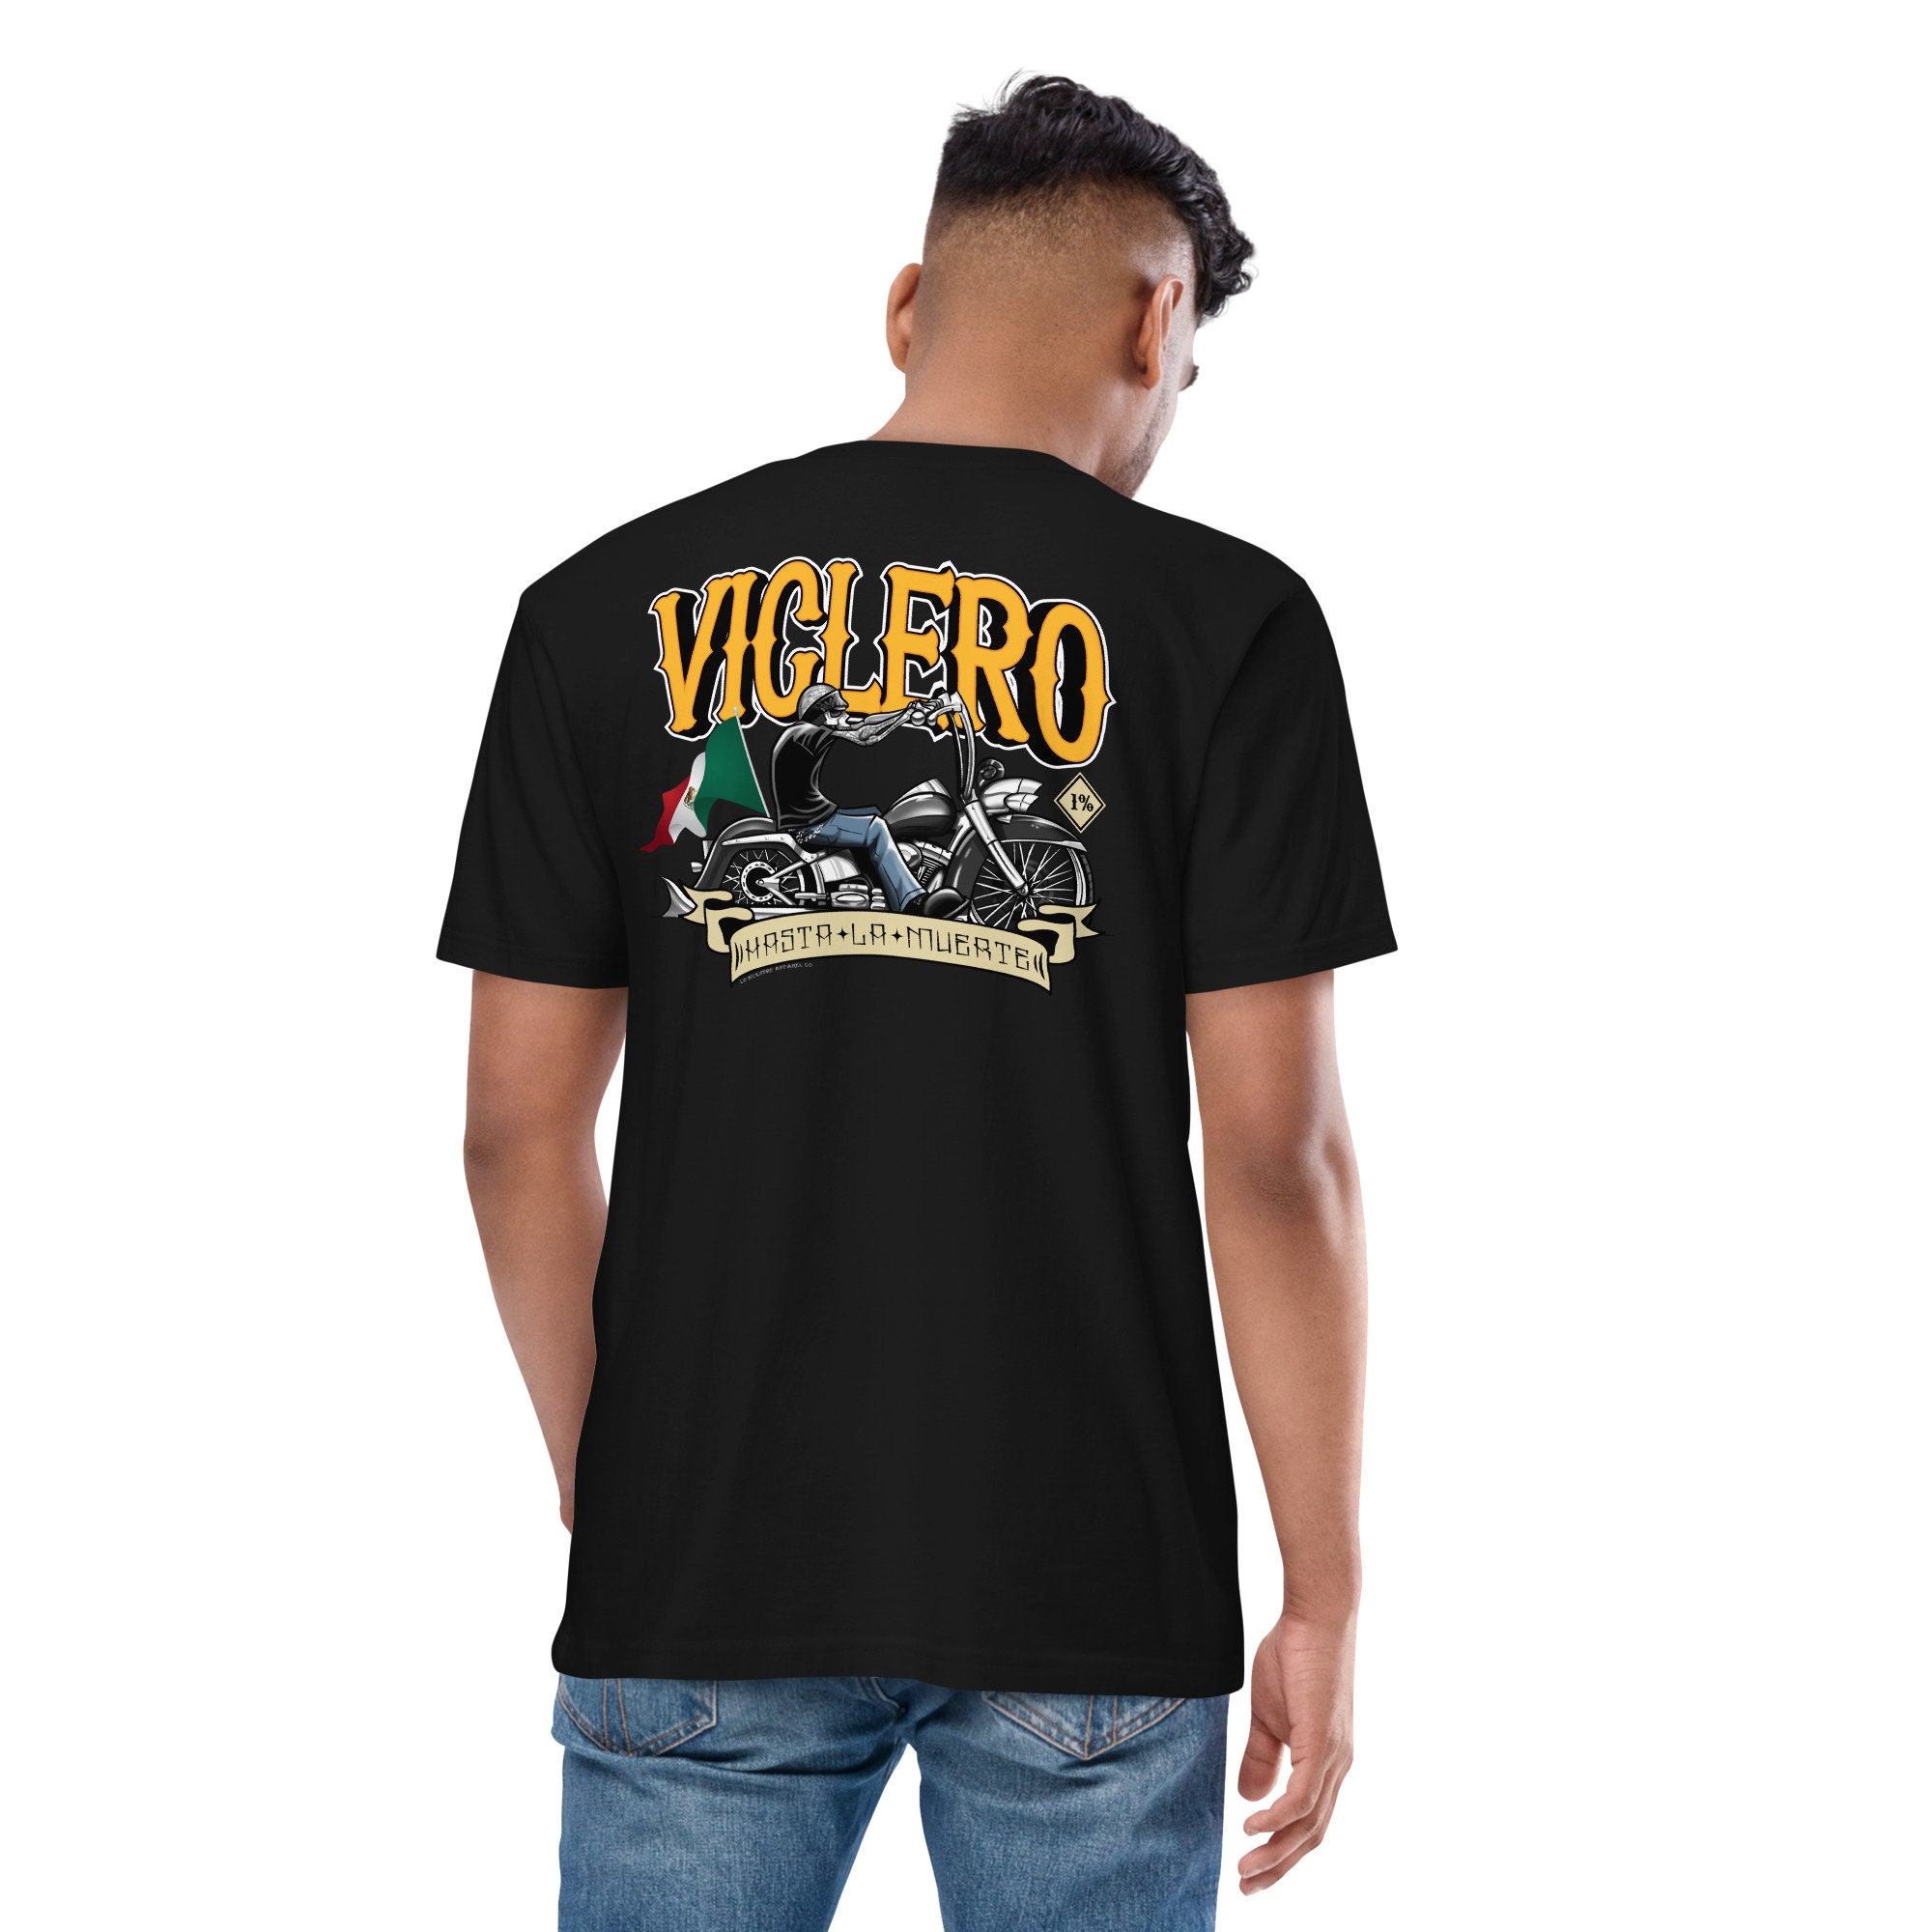 Viclero Hasta La Muerte front and Back Print Cotton Shirt, Motorcycle ...